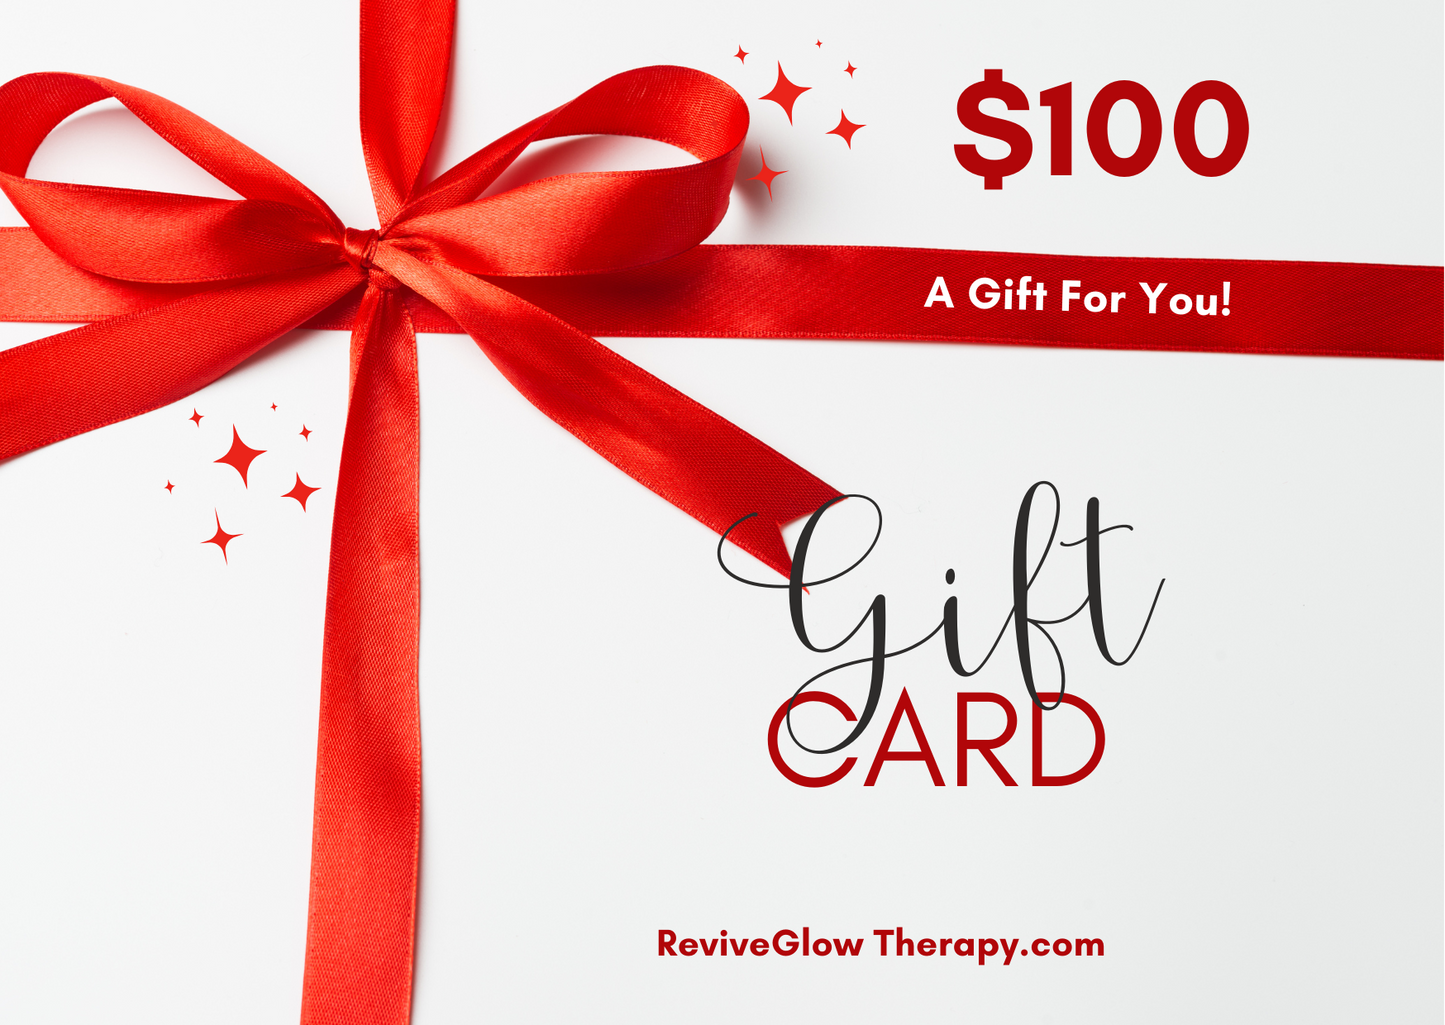 ReviveGlow Therapy Gift Card